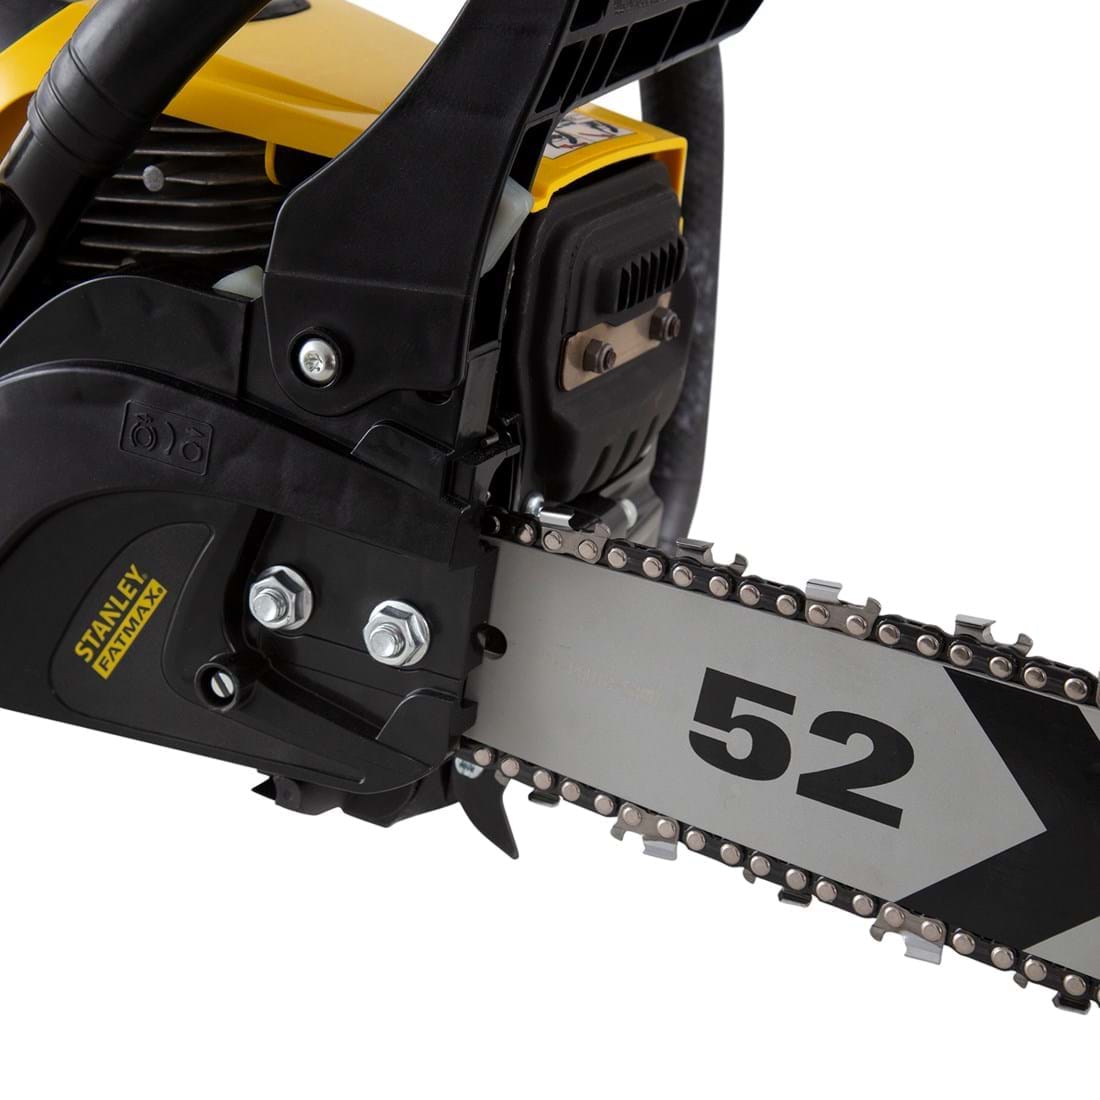 Stanley SCS-52 JET 52cc 2-stroke 18inch Chainsaw Petrol and Oil Fuel 